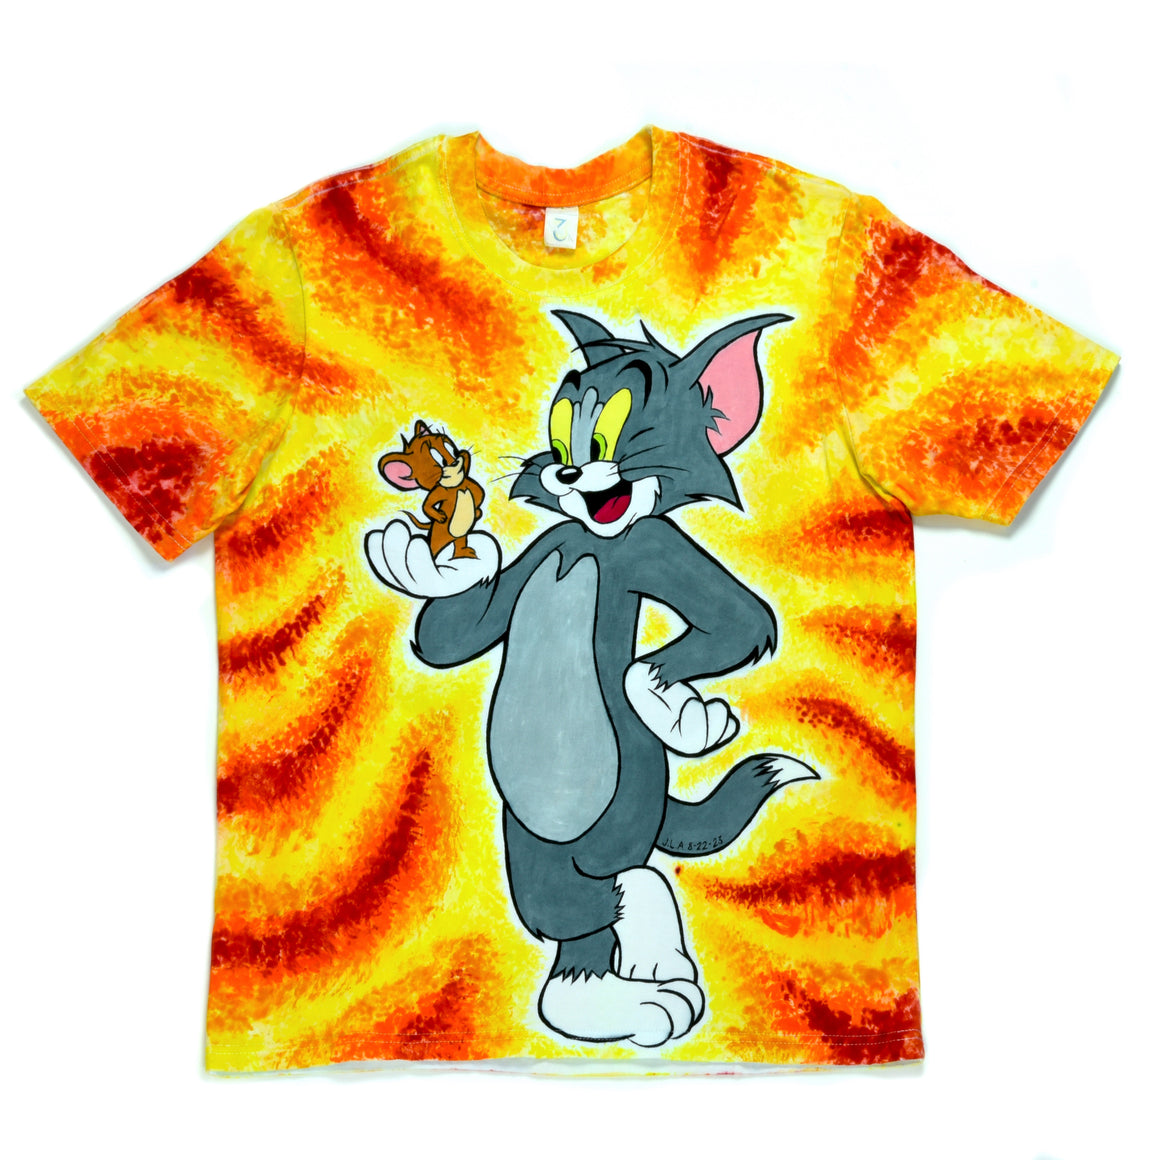 Medium - Hand-painted and Dyed T-Shirt - Tom and Jerry #1